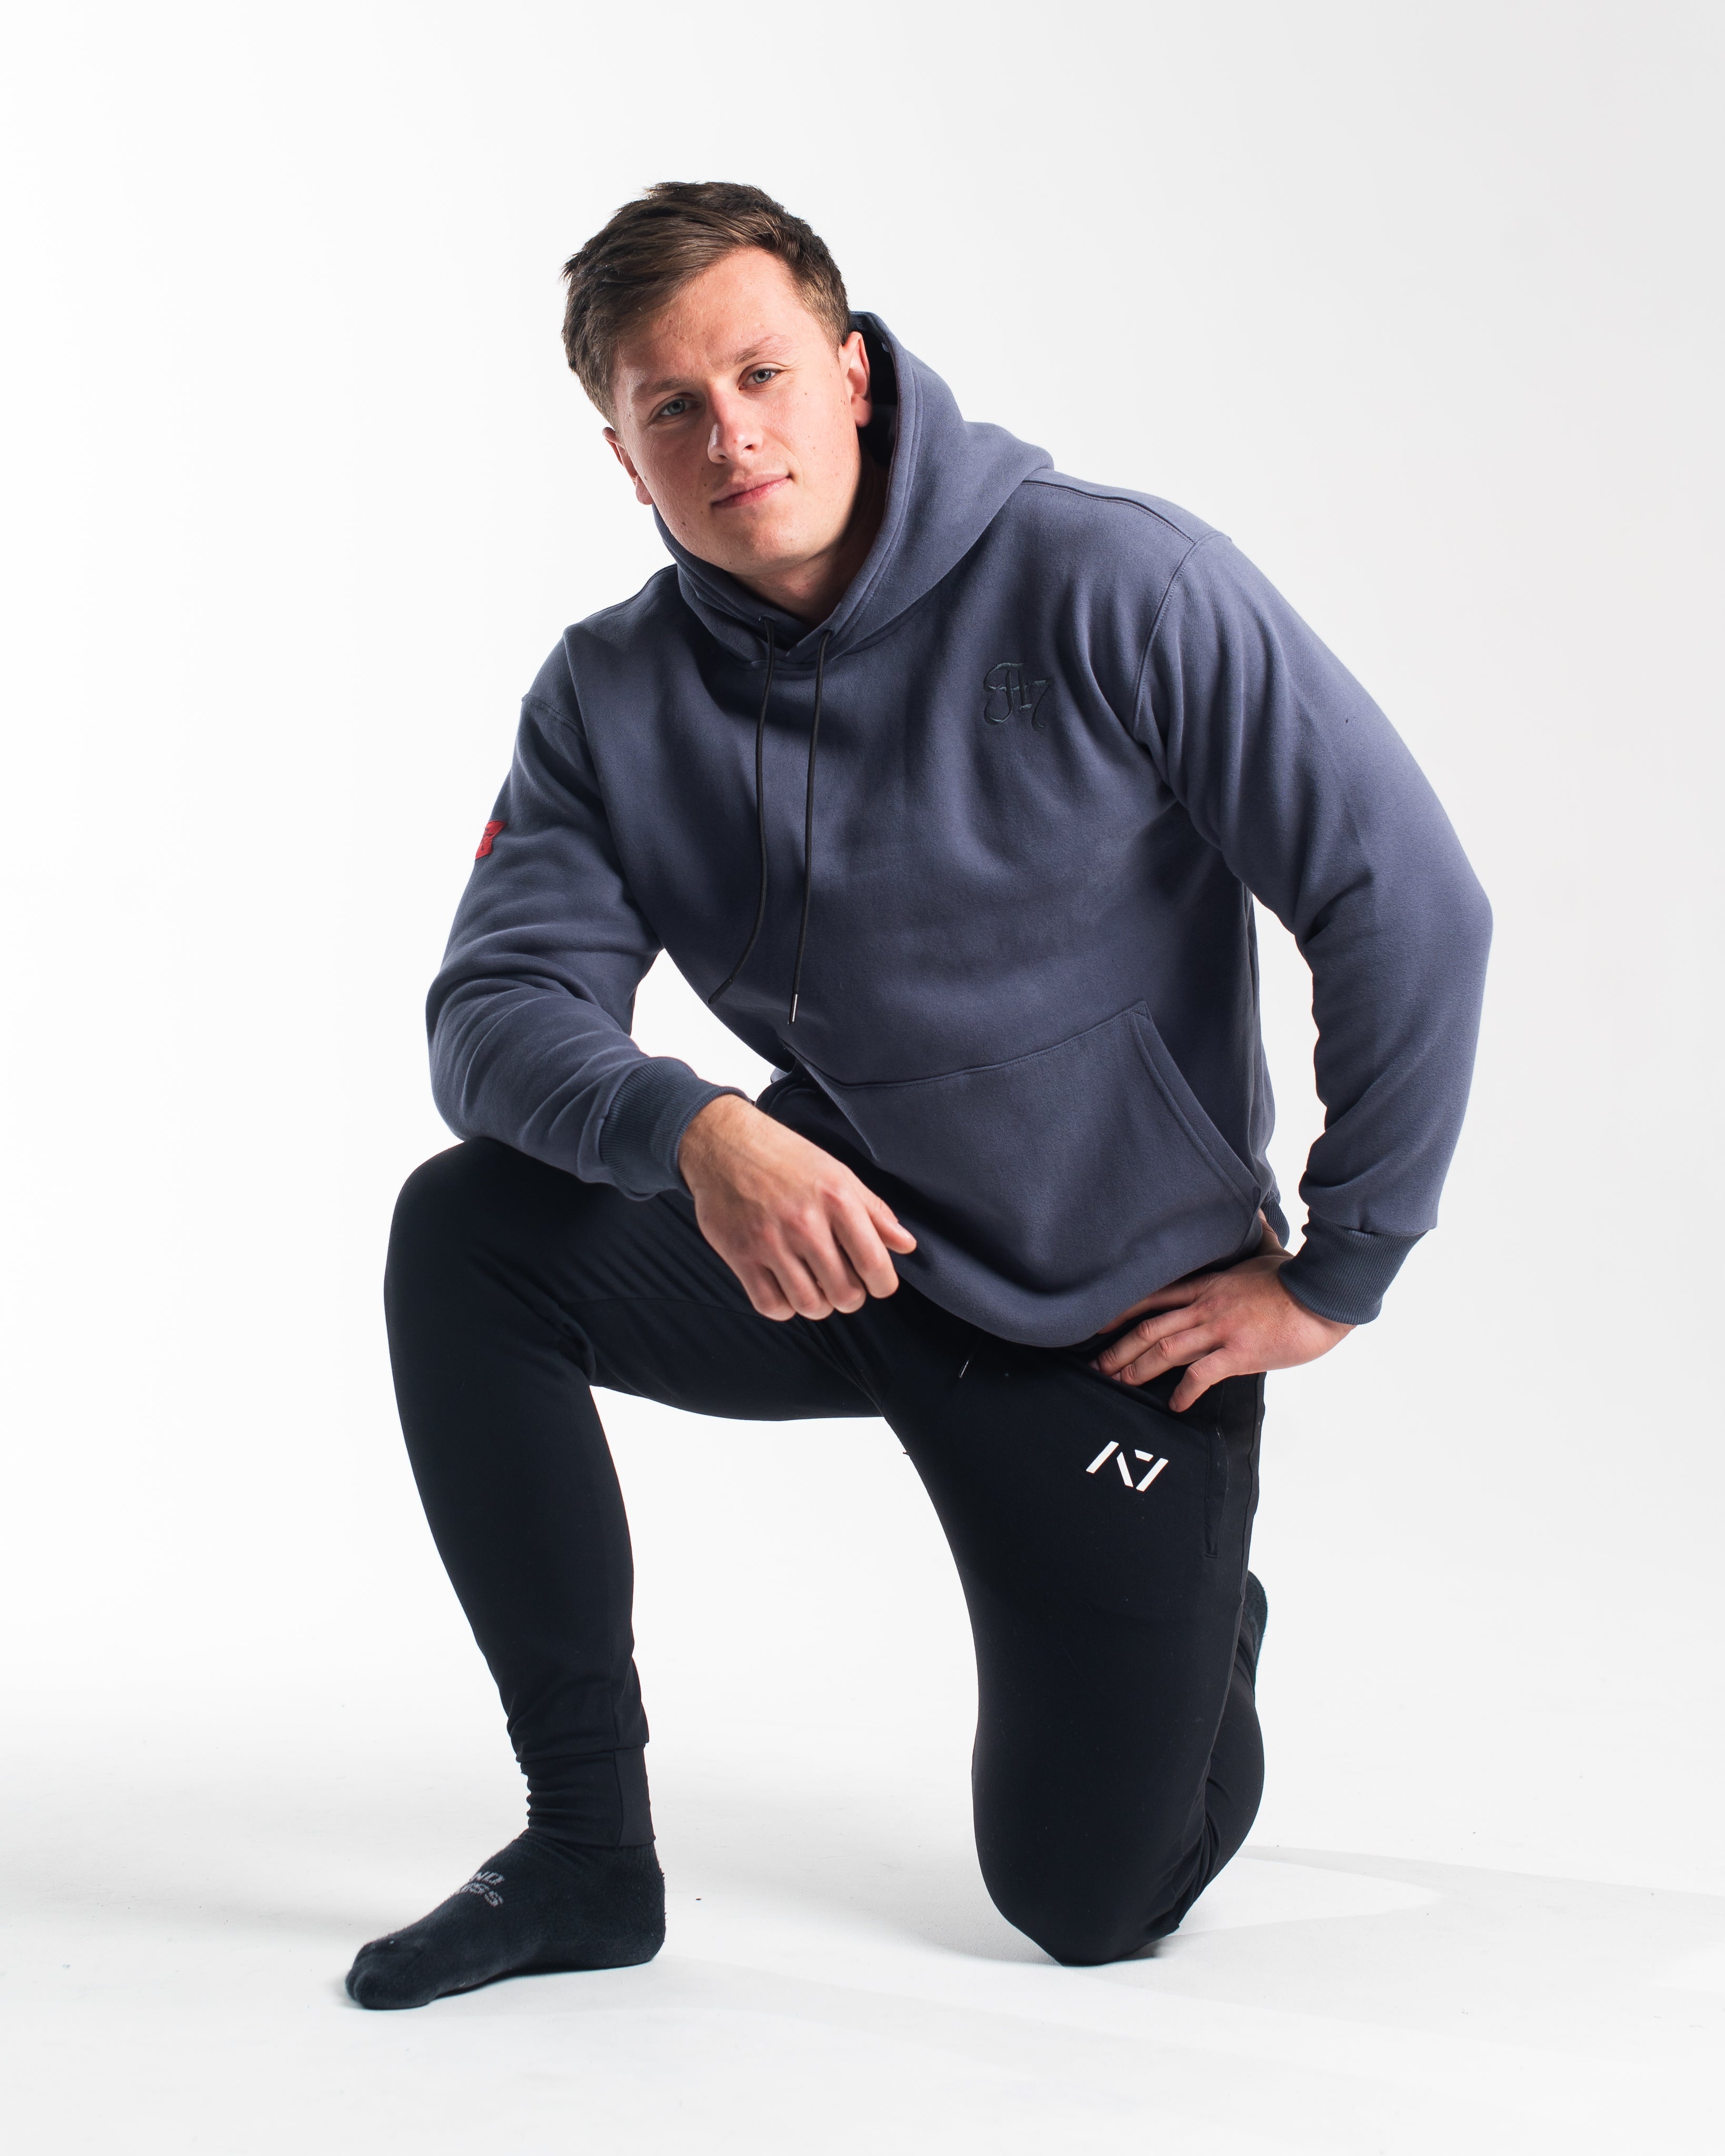 The Script collection was designed for daily comfort wear in and out the gym. All A7 Powerlifting Equipment shipping to UK, Norway, Switzerland and Iceland.